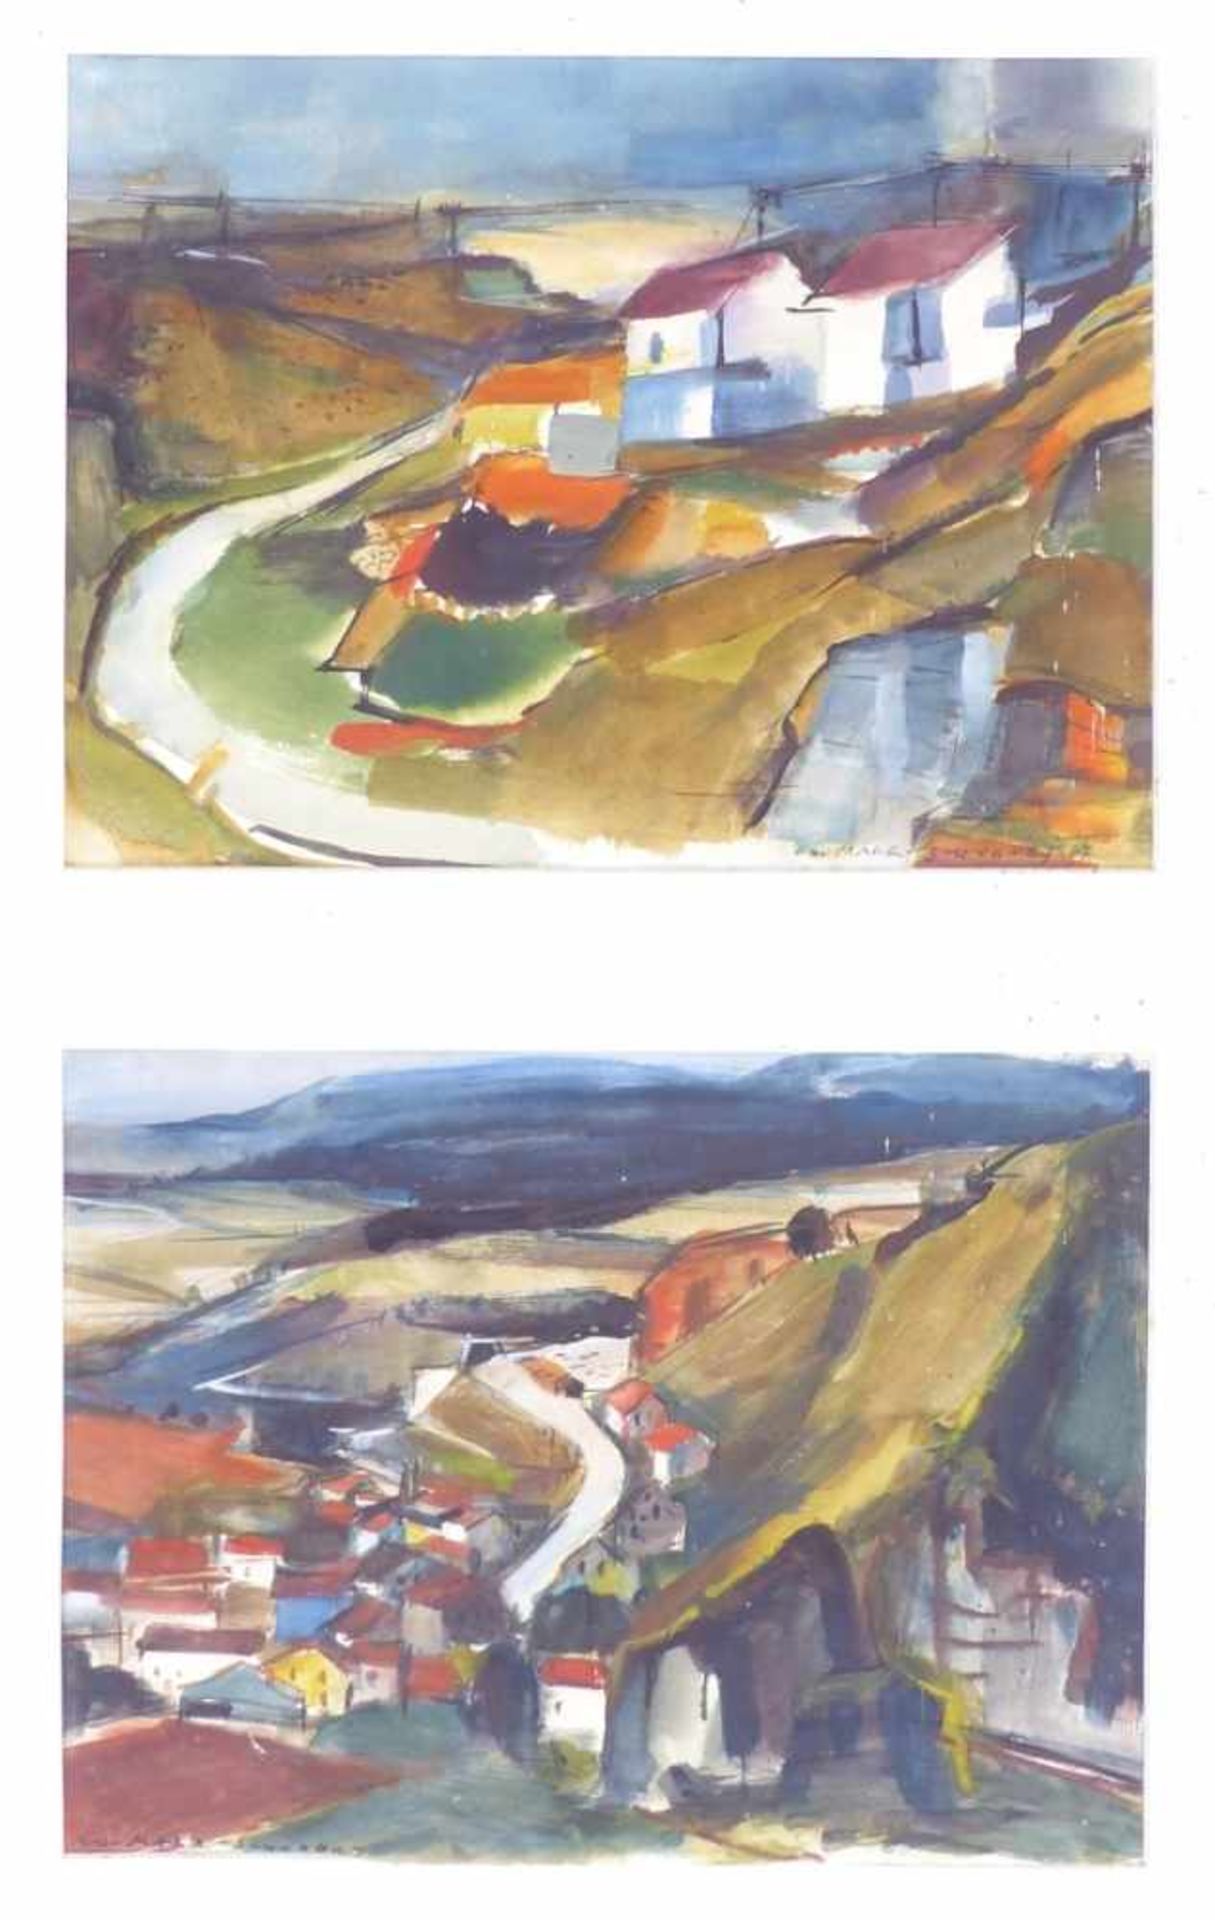 Marr-Schobert, CharlotteDouble picture with Franconian villages(Nuremberg 1917-1998 ibid.) Two